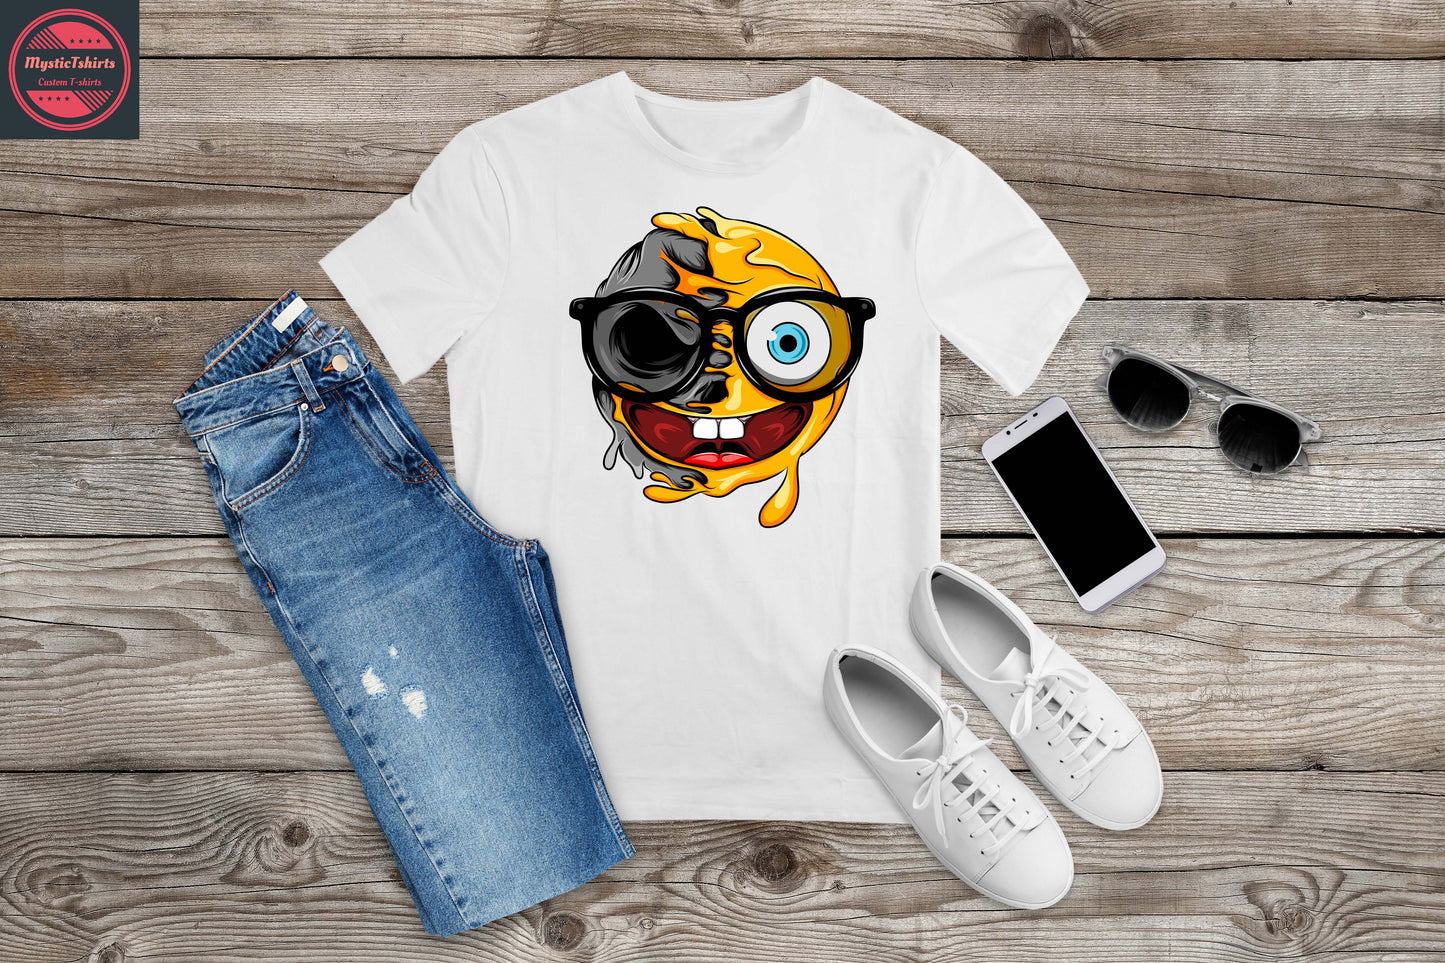 101. CRAZY FACE, Personalized T-Shirt, Custom Text, Make Your Own Shirt, Custom Tee